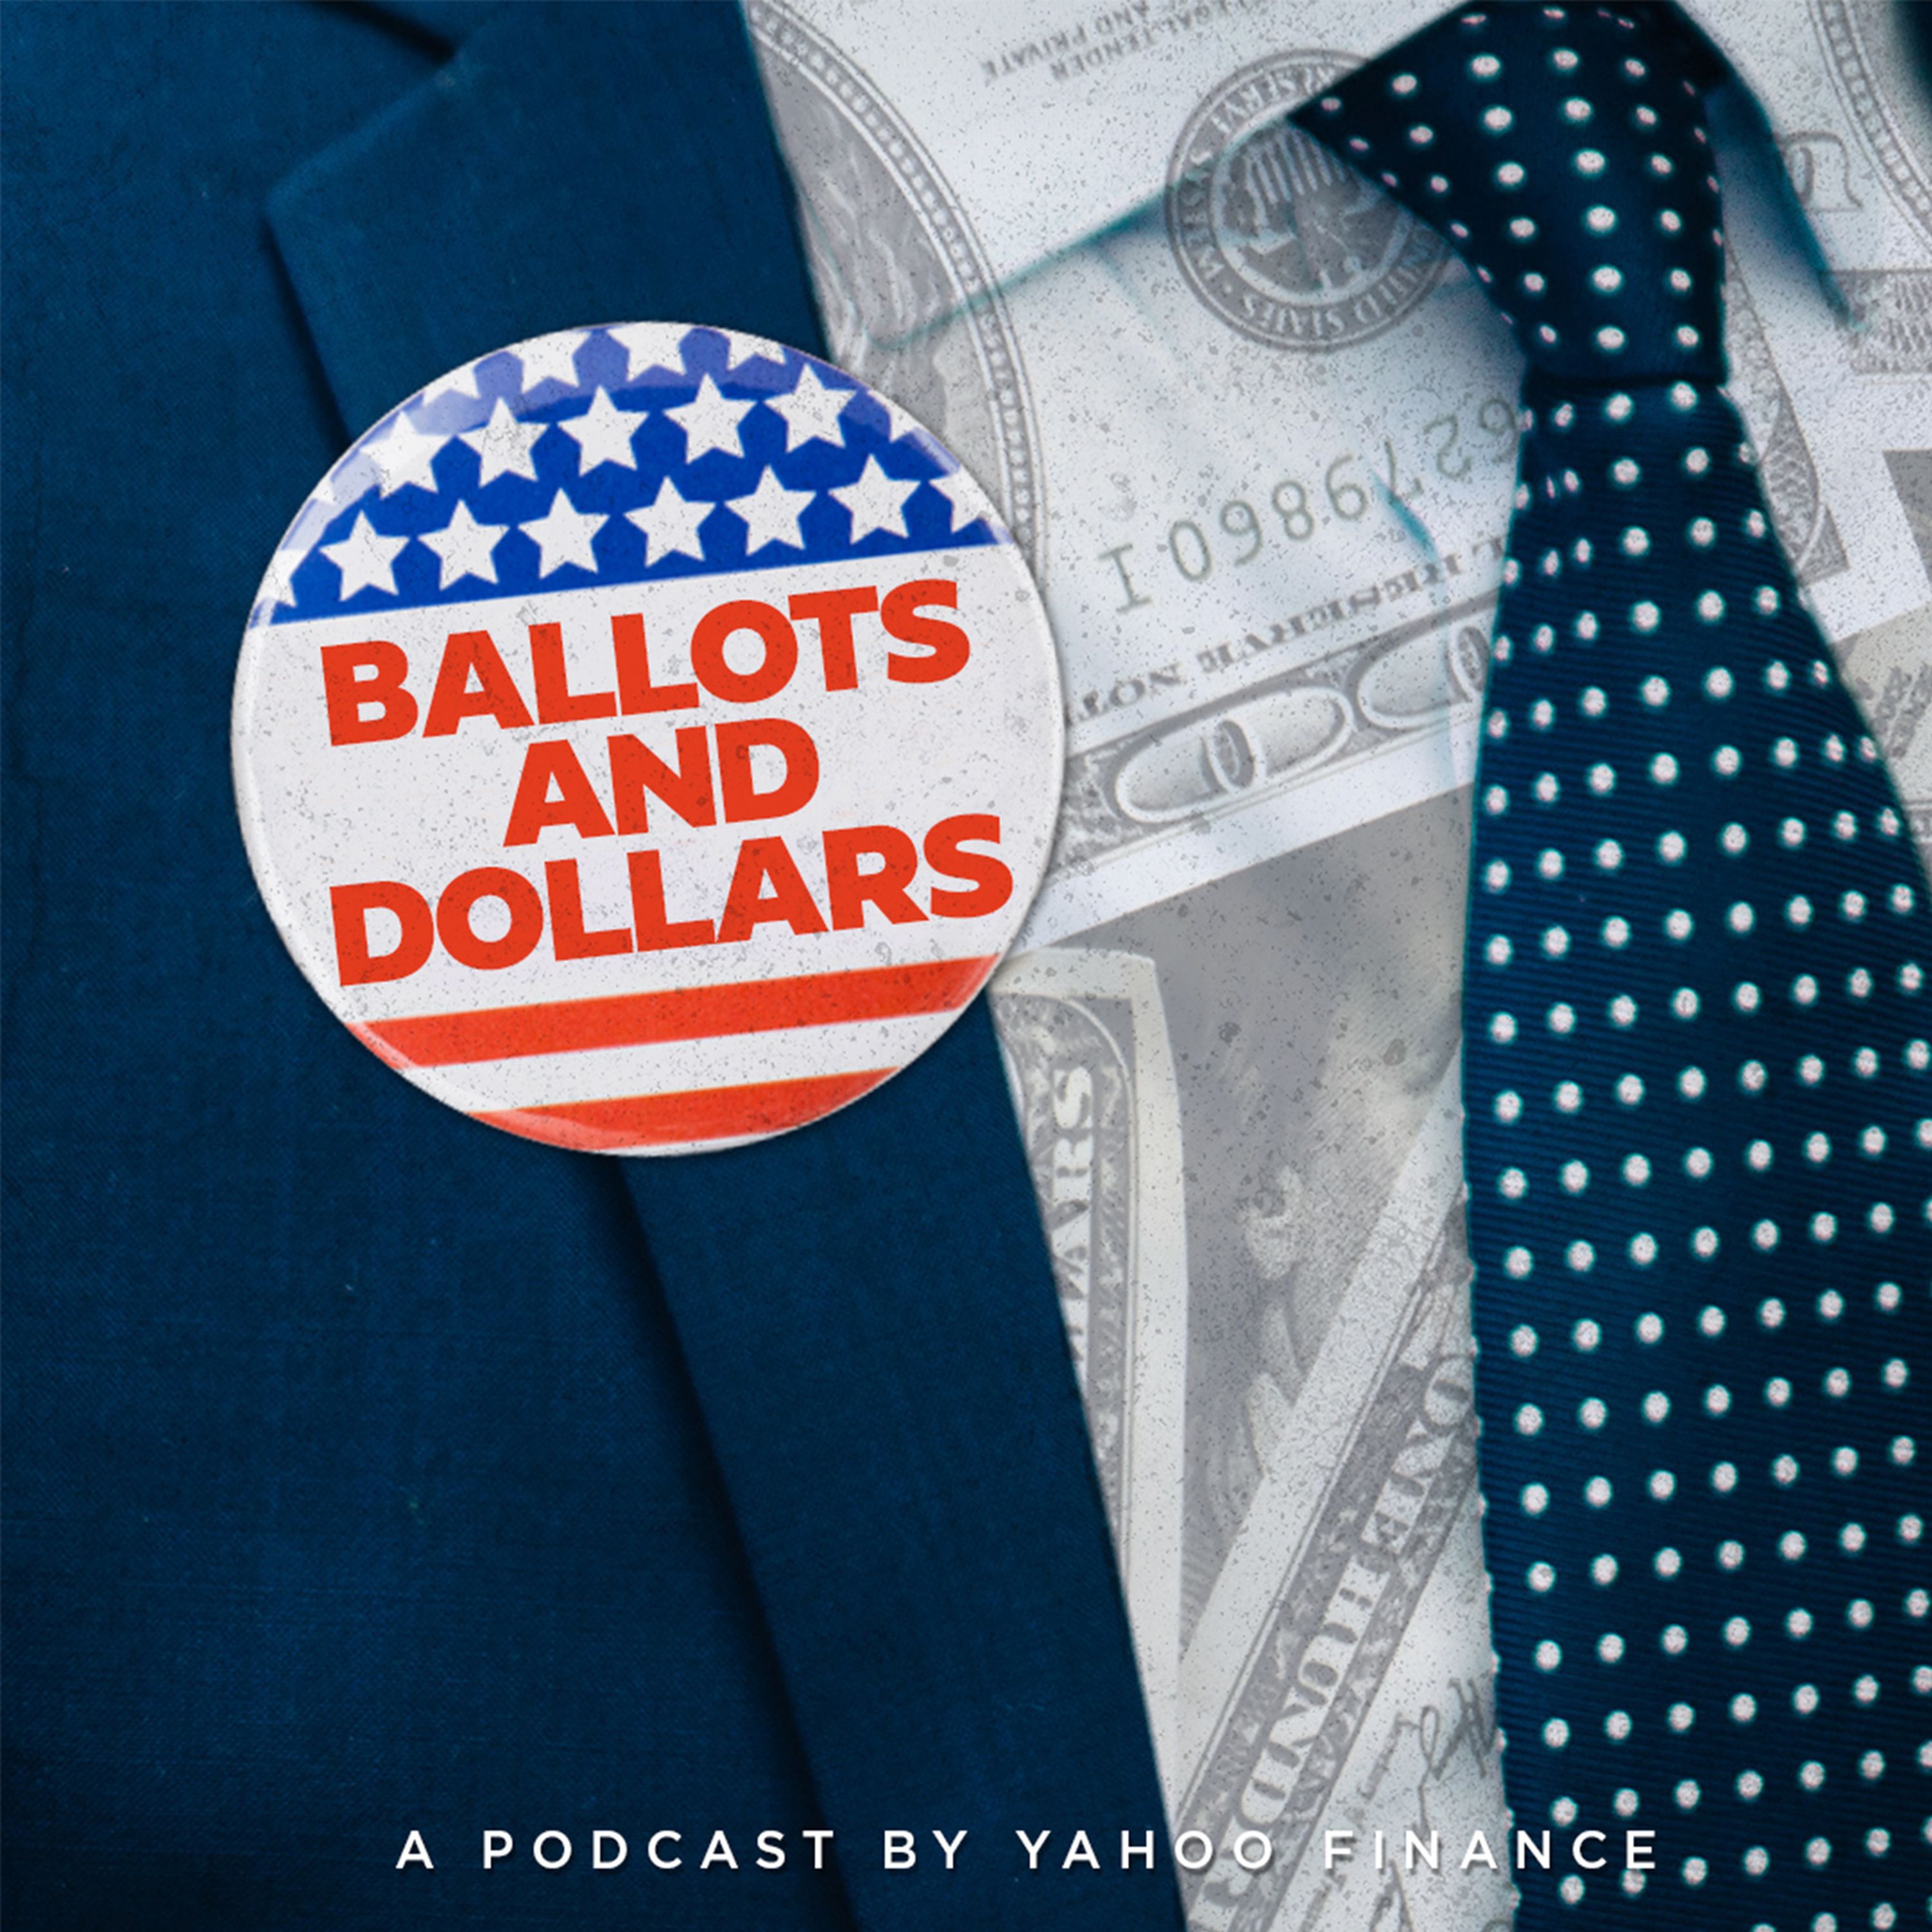 Introducing Ballots and Dollars: A new podcast by Yahoo Finance